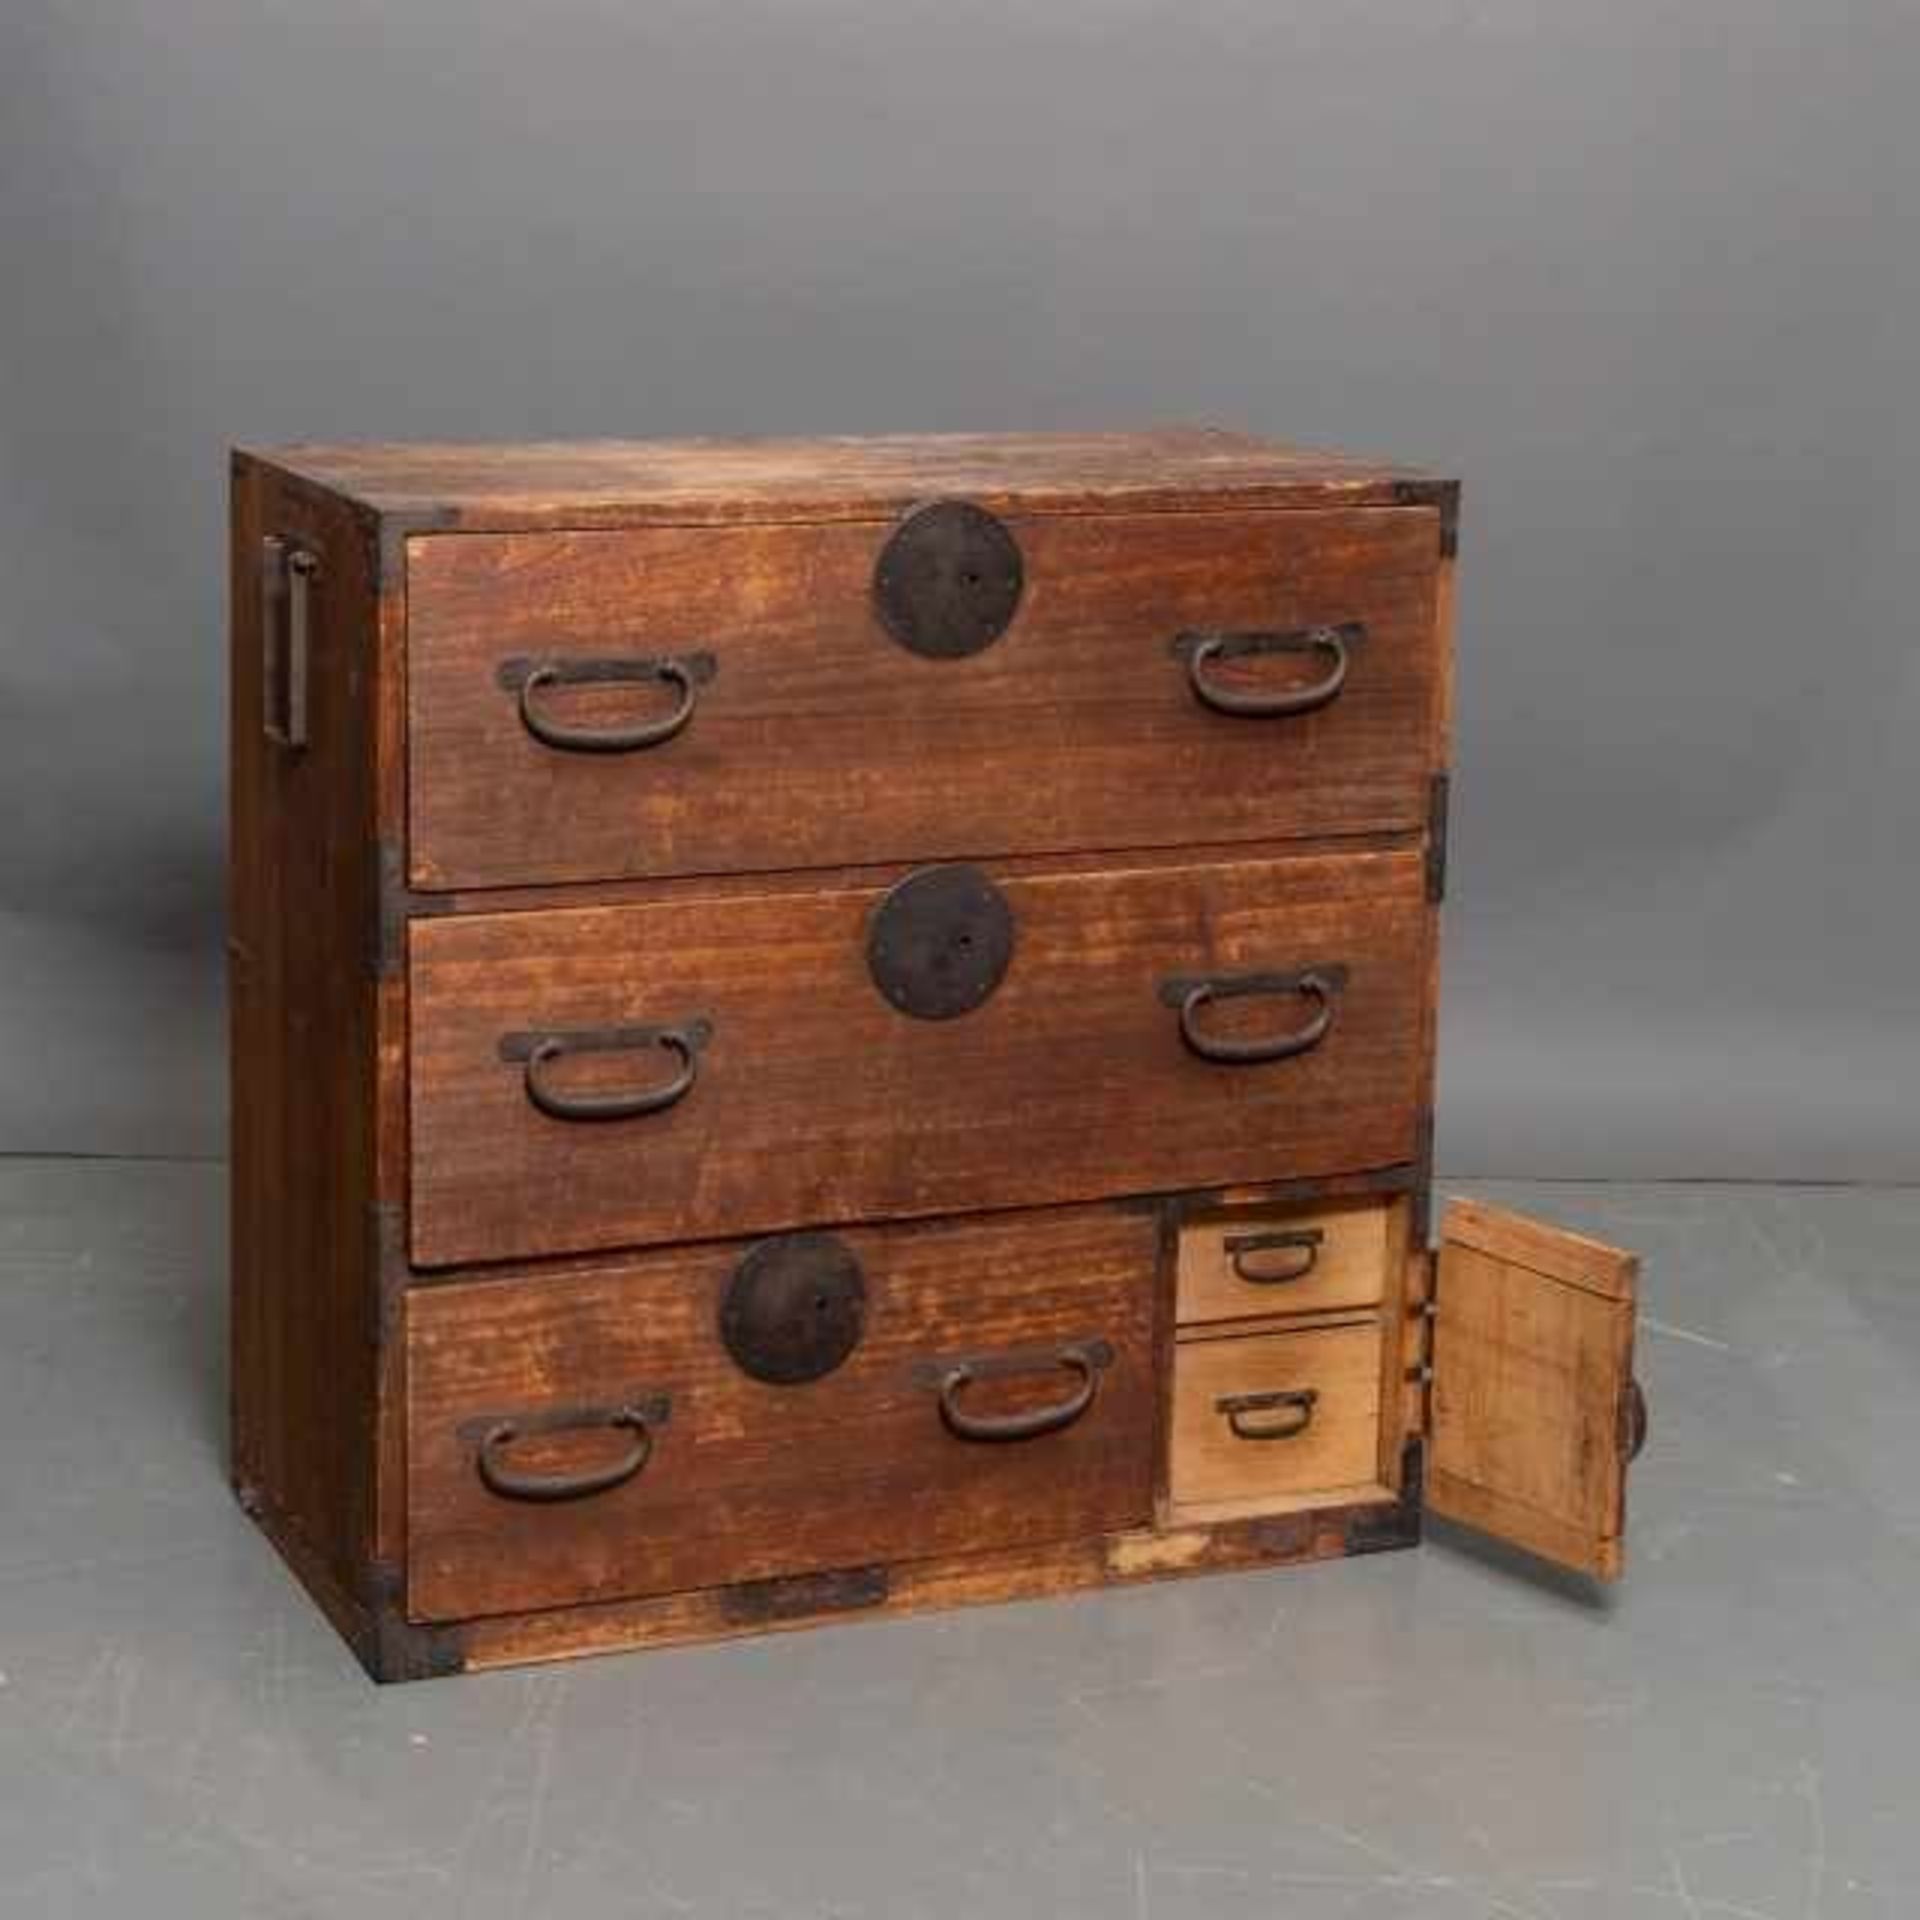 Kiri-wooden tansu with cast iron fittings and saotôshi handles, the three lockable drawers in the